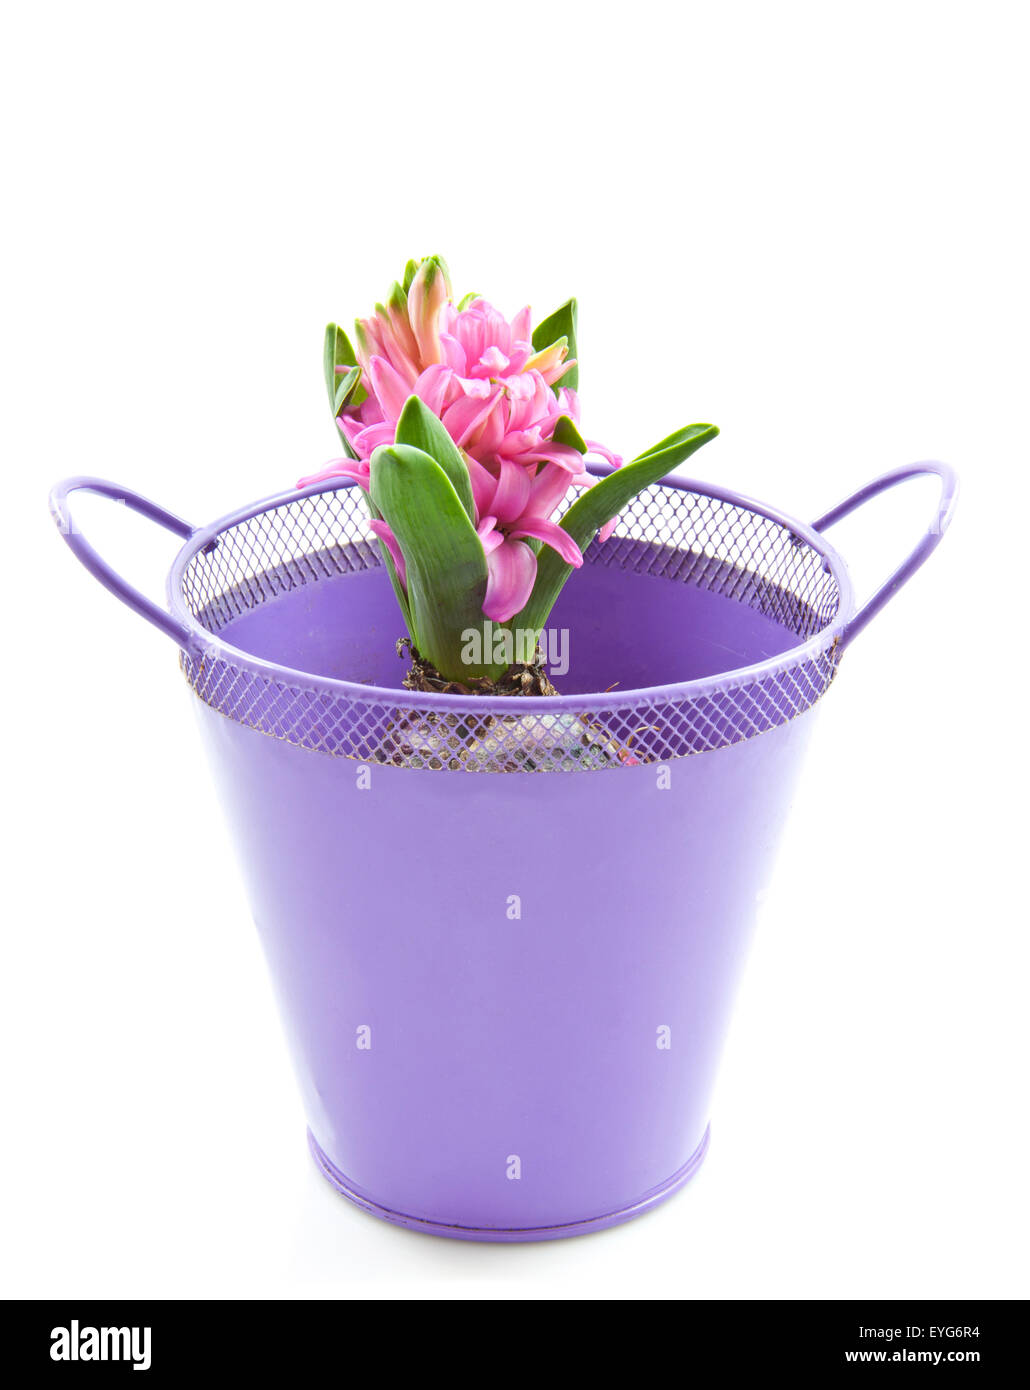 Pink hyacinth in a purple bucket over white Stock Photo